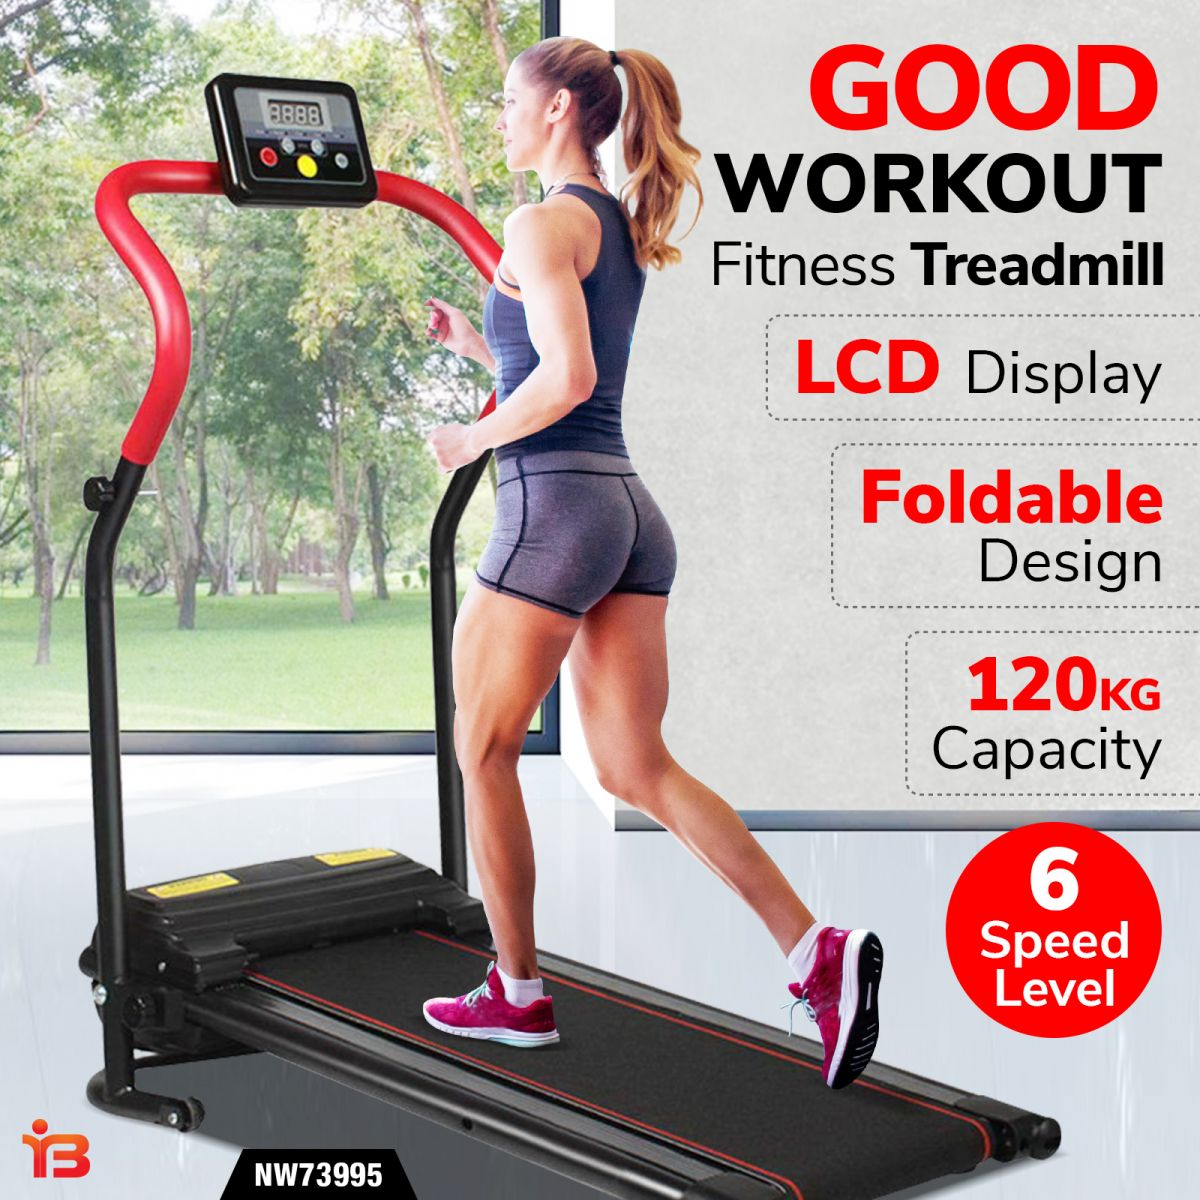 Promotional image of a 'Good Workout' fitness treadmill with LCD display, foldable design, supporting up to 120 kg capacity, set in a park-like setting.